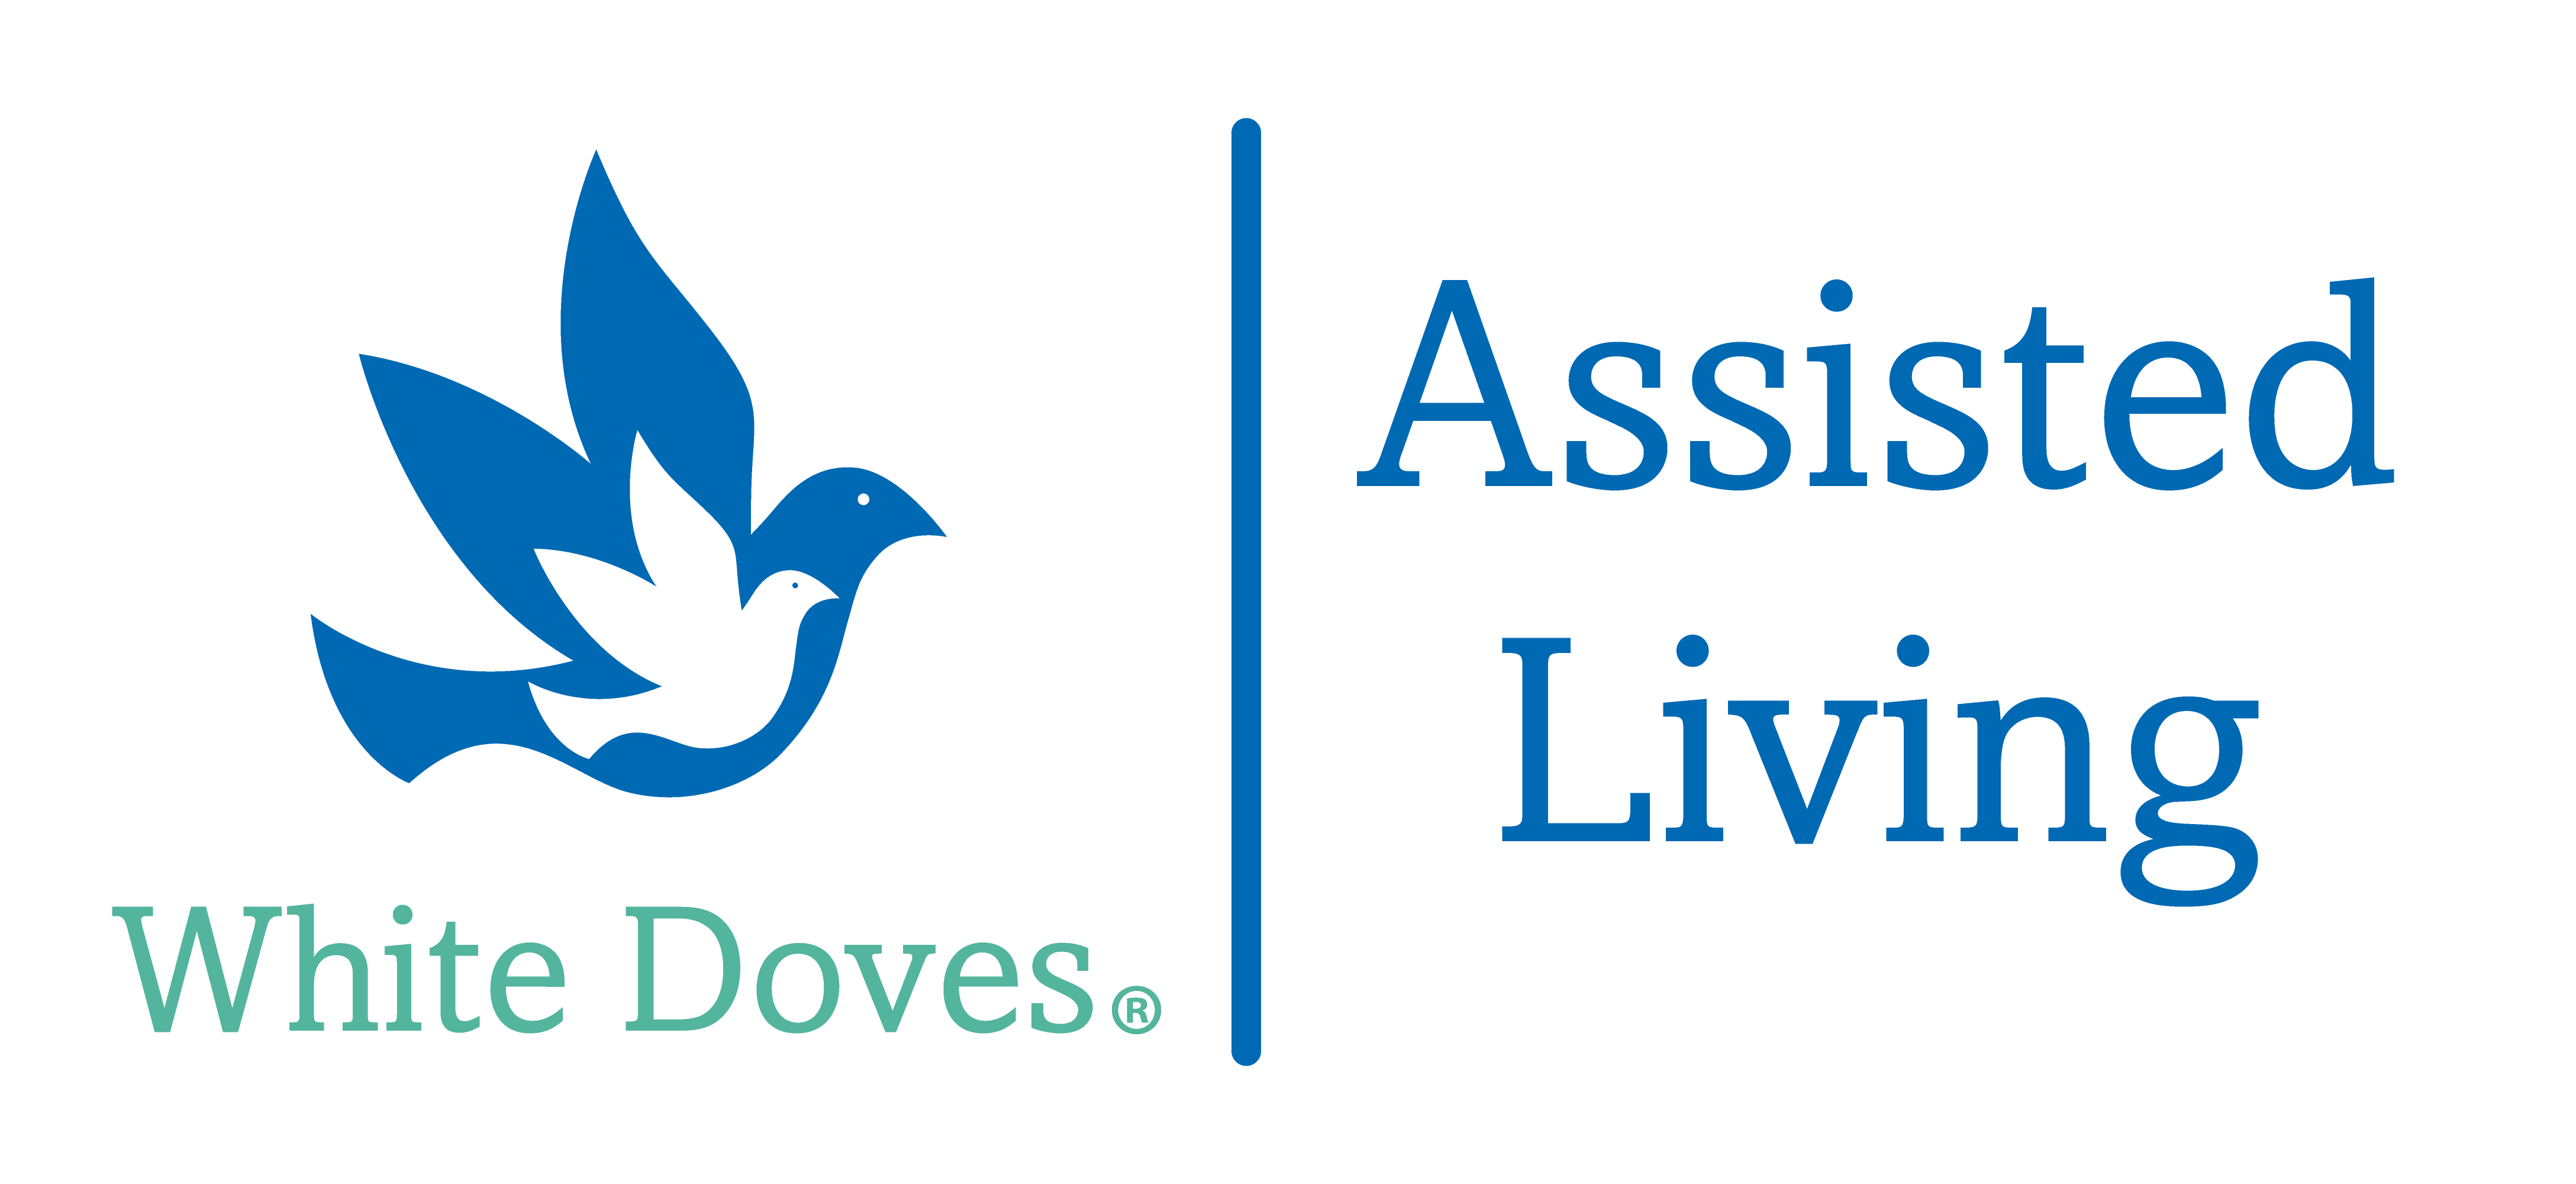 White Doves® - Assisted Living Services